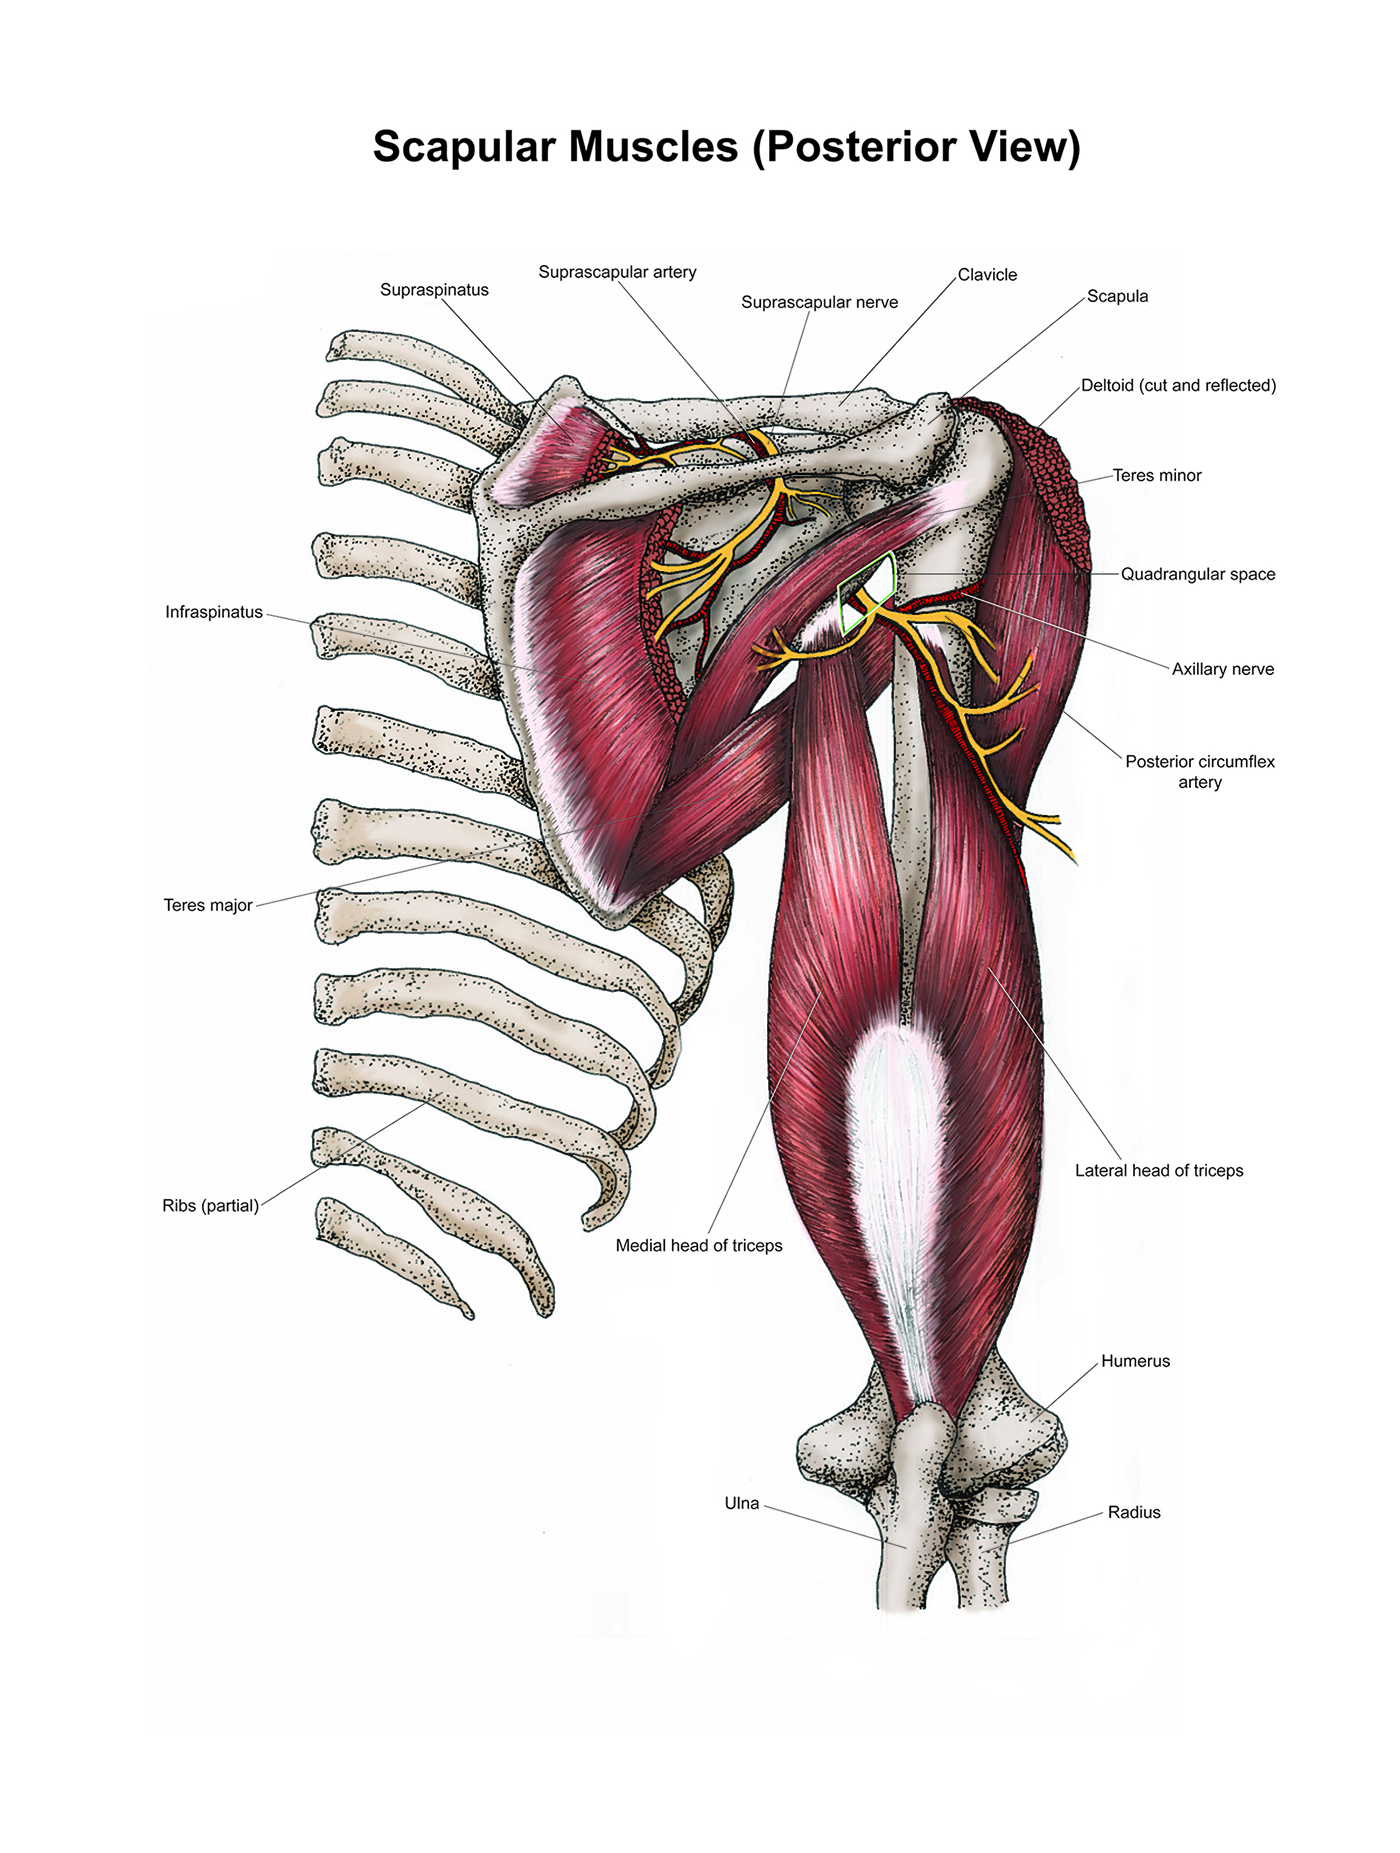 An illustration of scapular muscles.